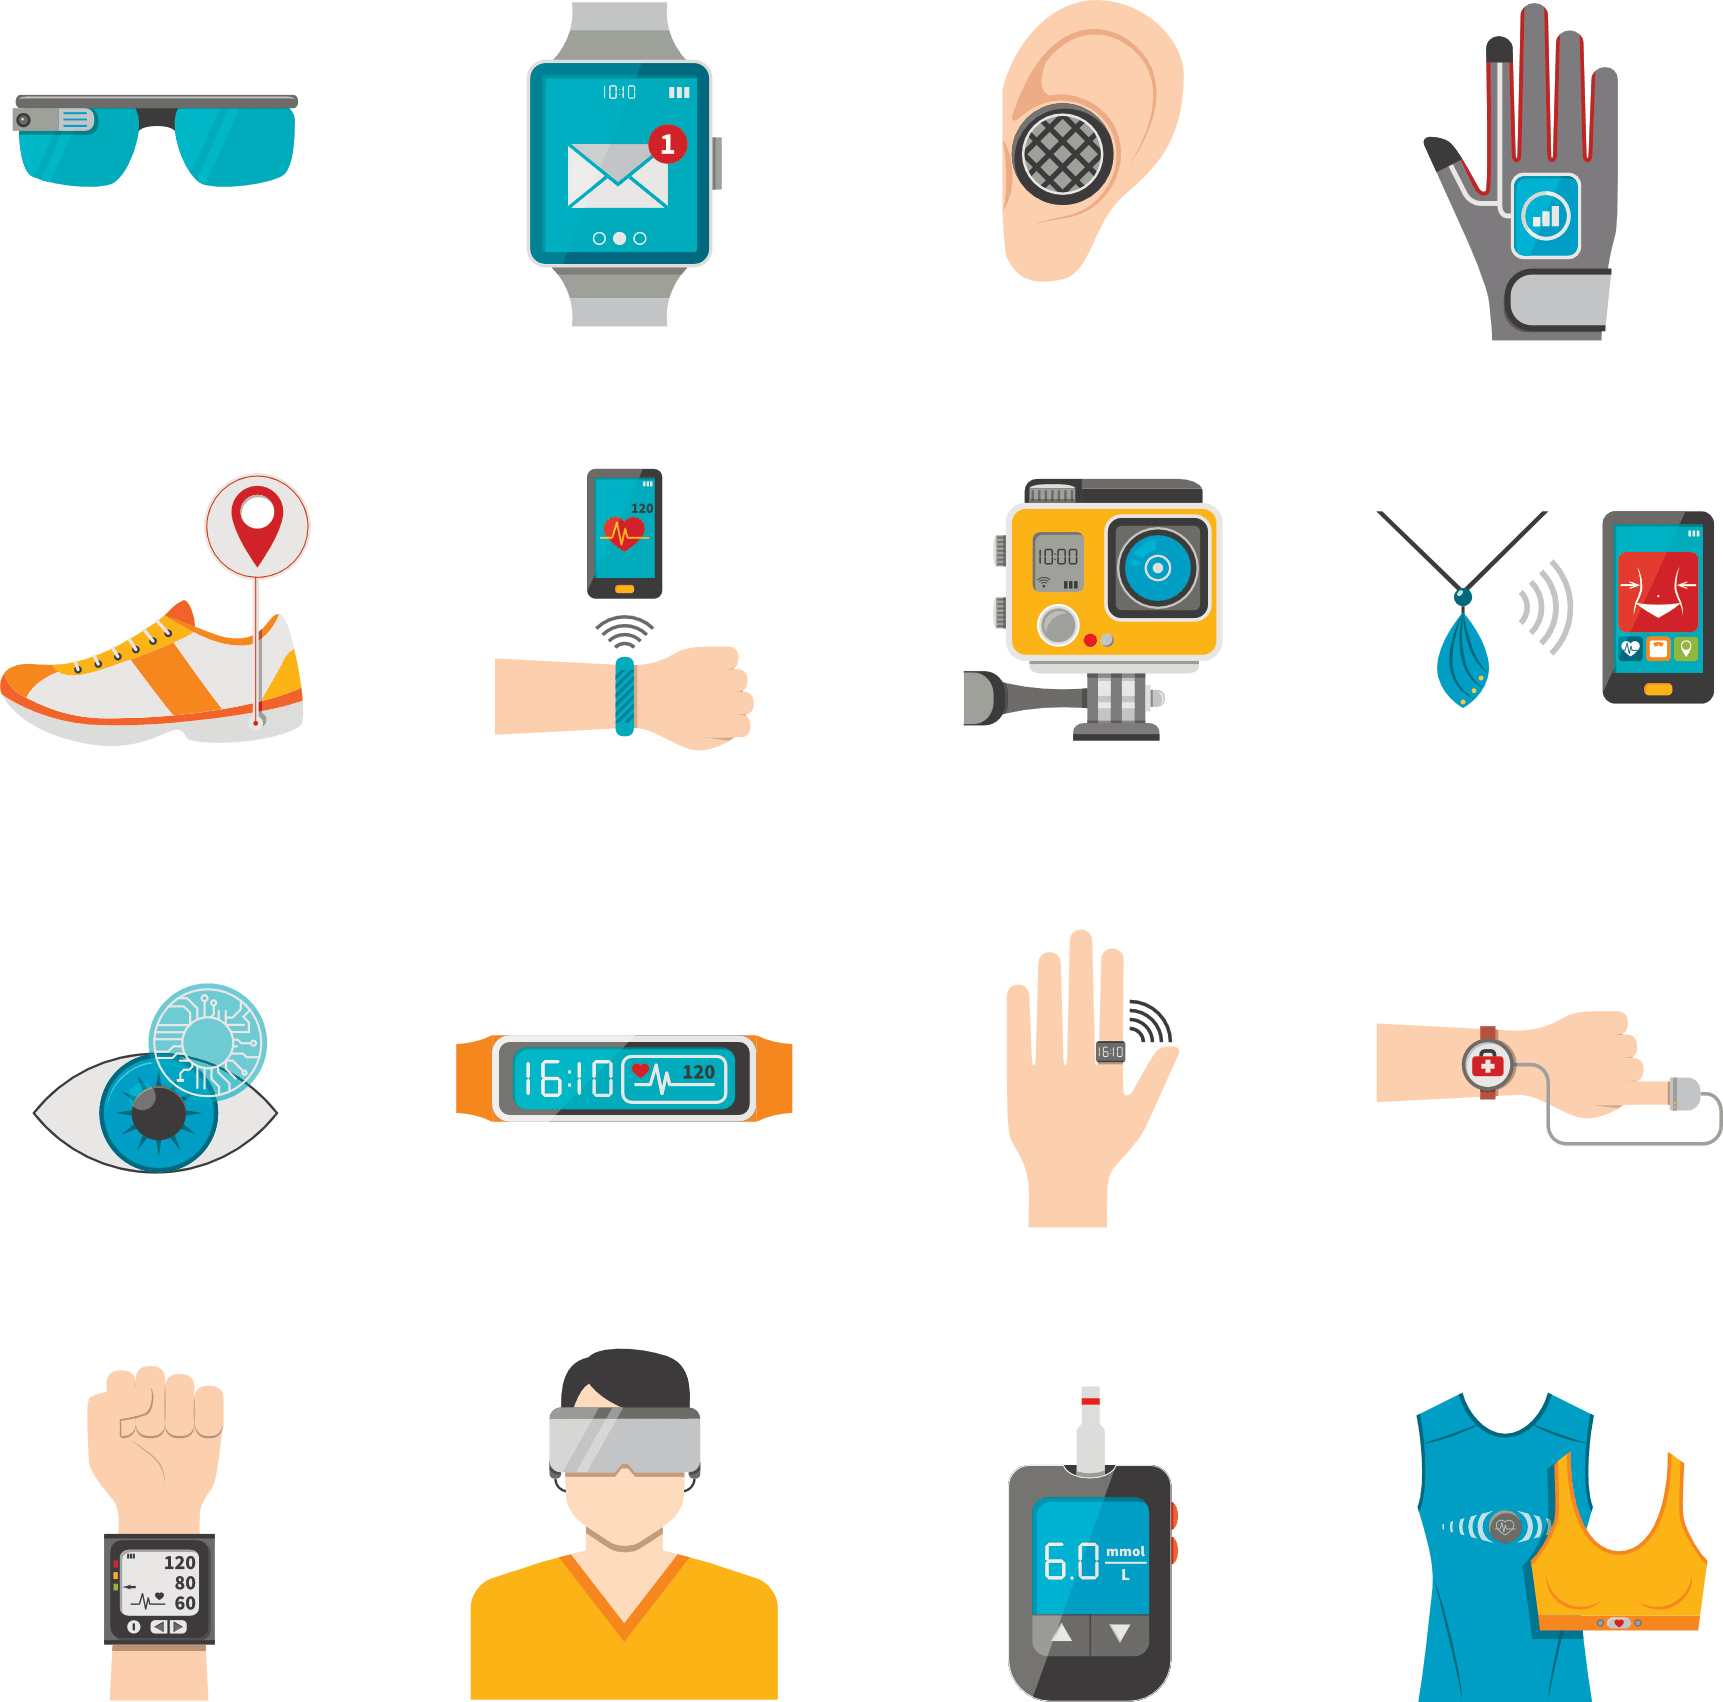 A variety of wearable technology devices including smartwatches, augmented reality glasses, health monitoring patches, earbuds, virtual reality headsets, and smart rings. These wearables represent innovations in connectivity, sensors, machine learning, and human-computer interaction.